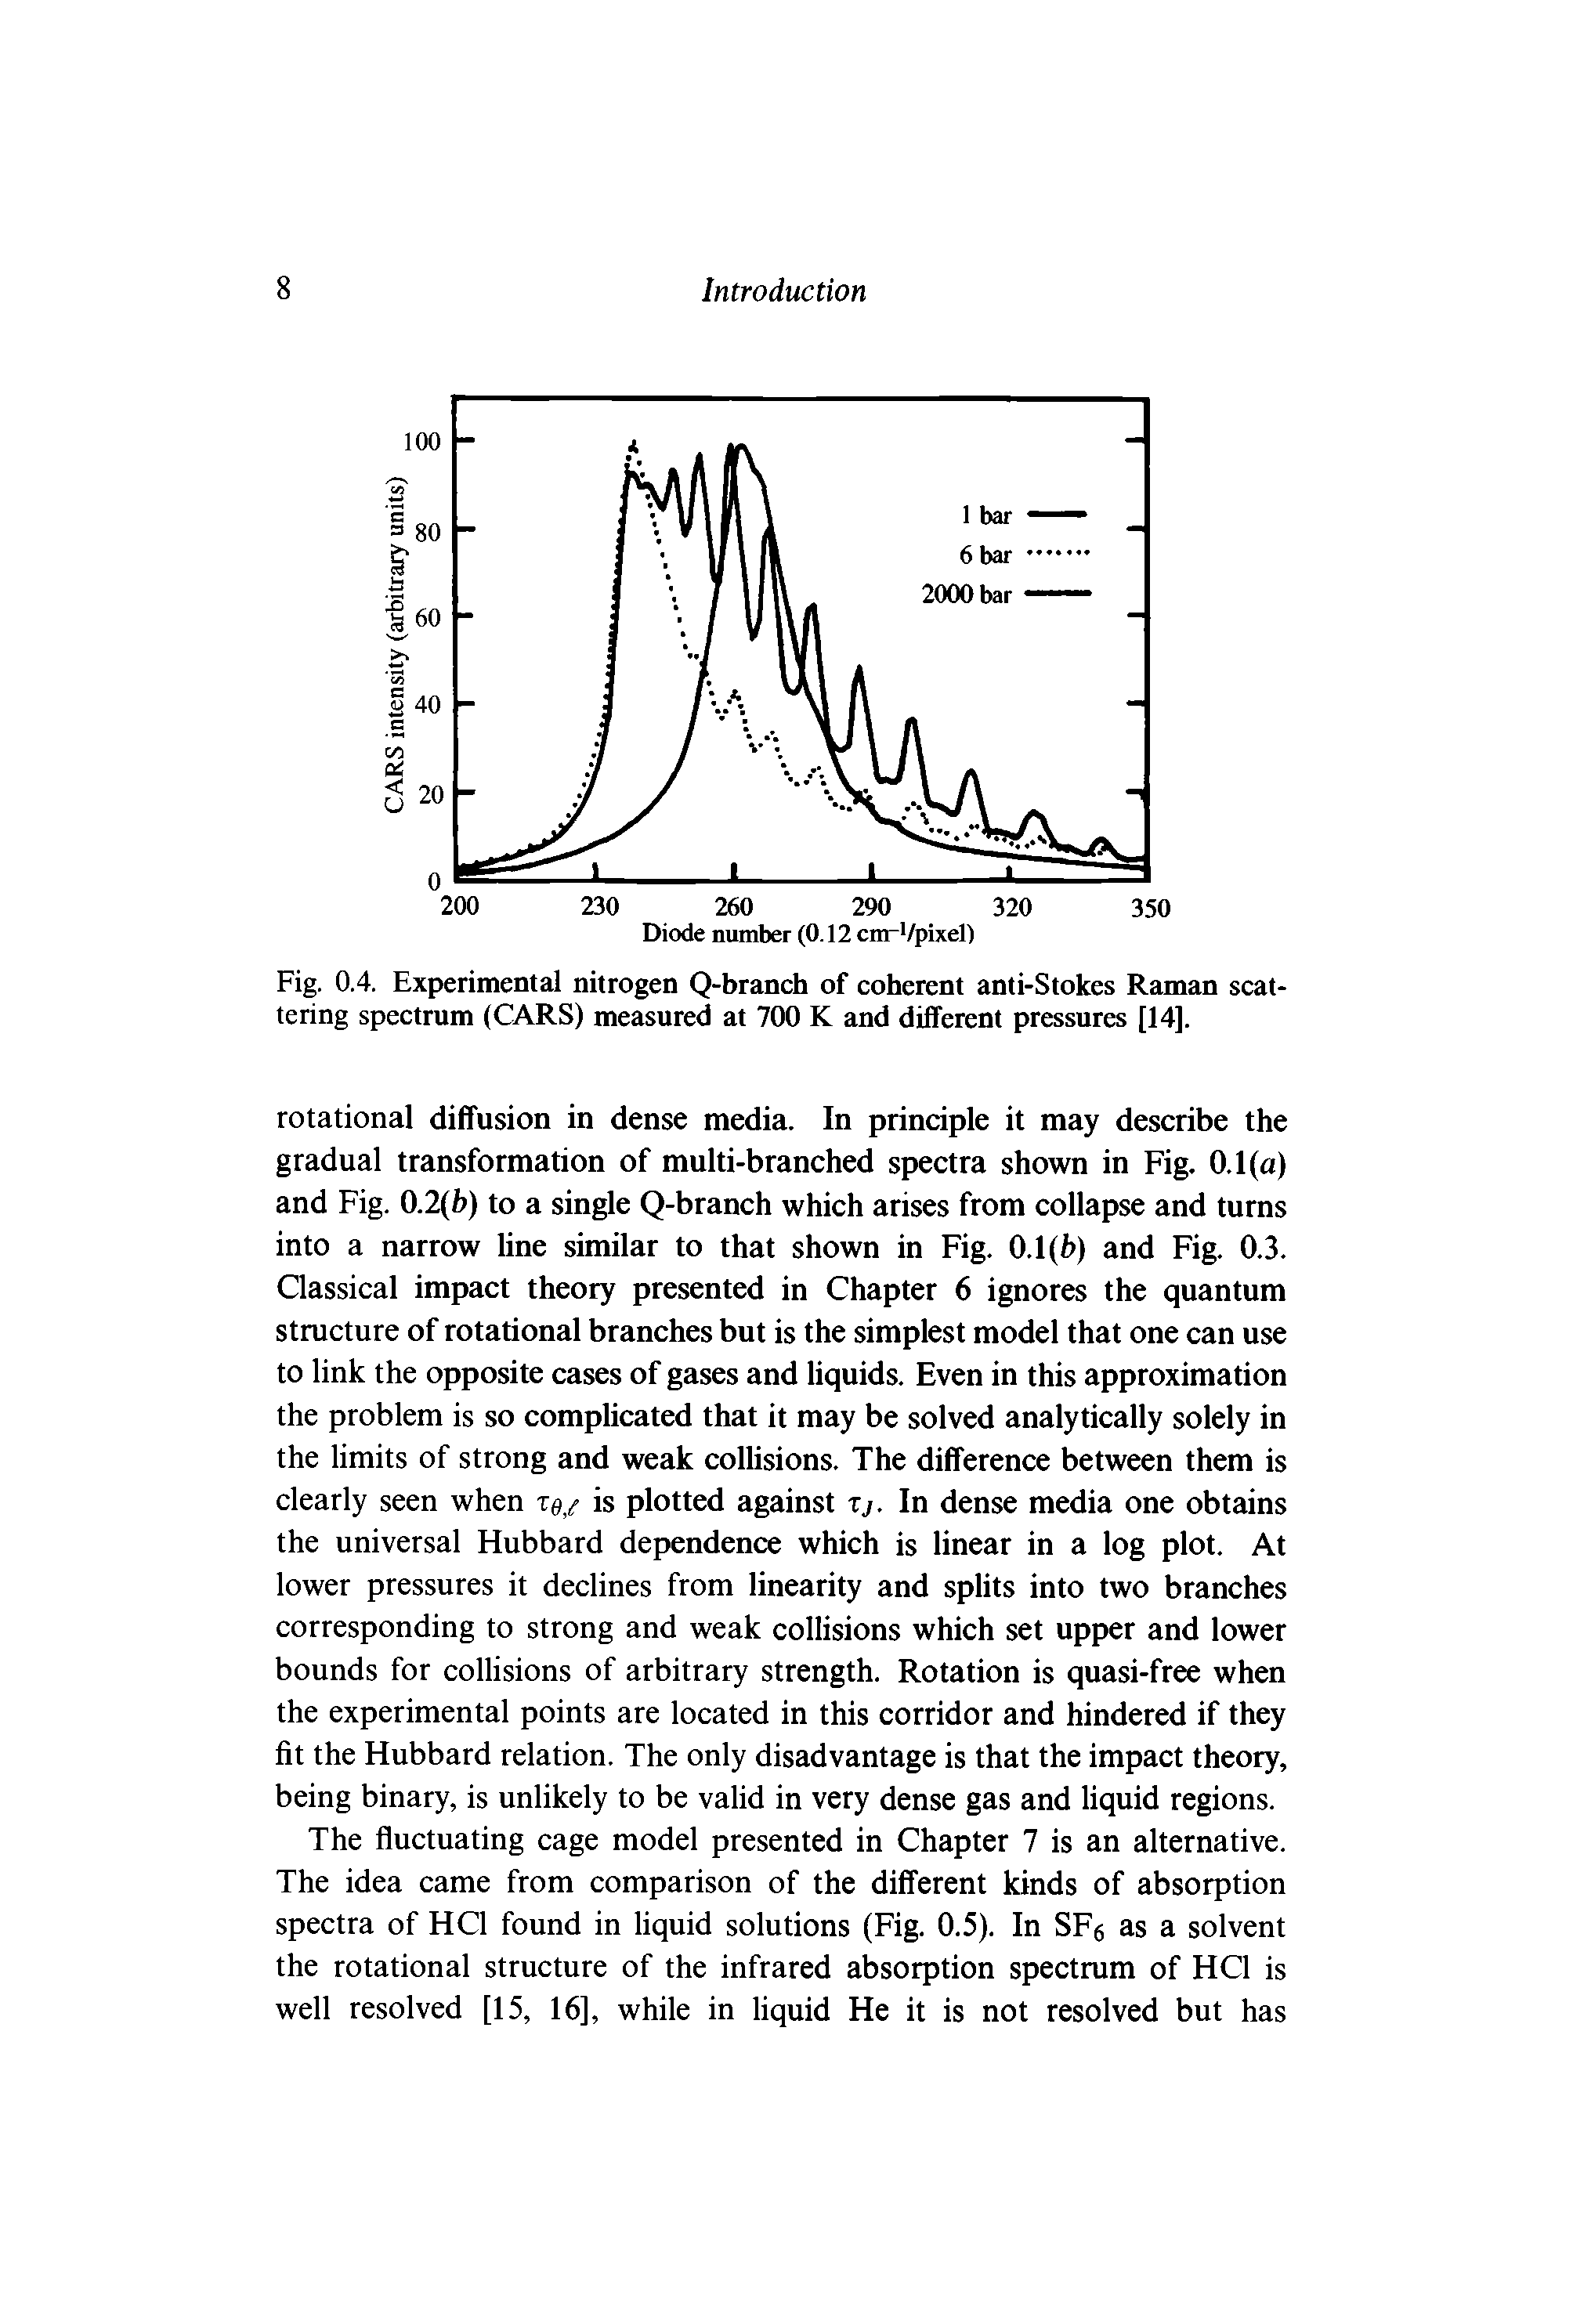 Fig. 0.4. Experimental nitrogen Q-branch of coherent anti-Stokes Raman scattering spectrum (CARS) measured at 700 K and different pressures [14].